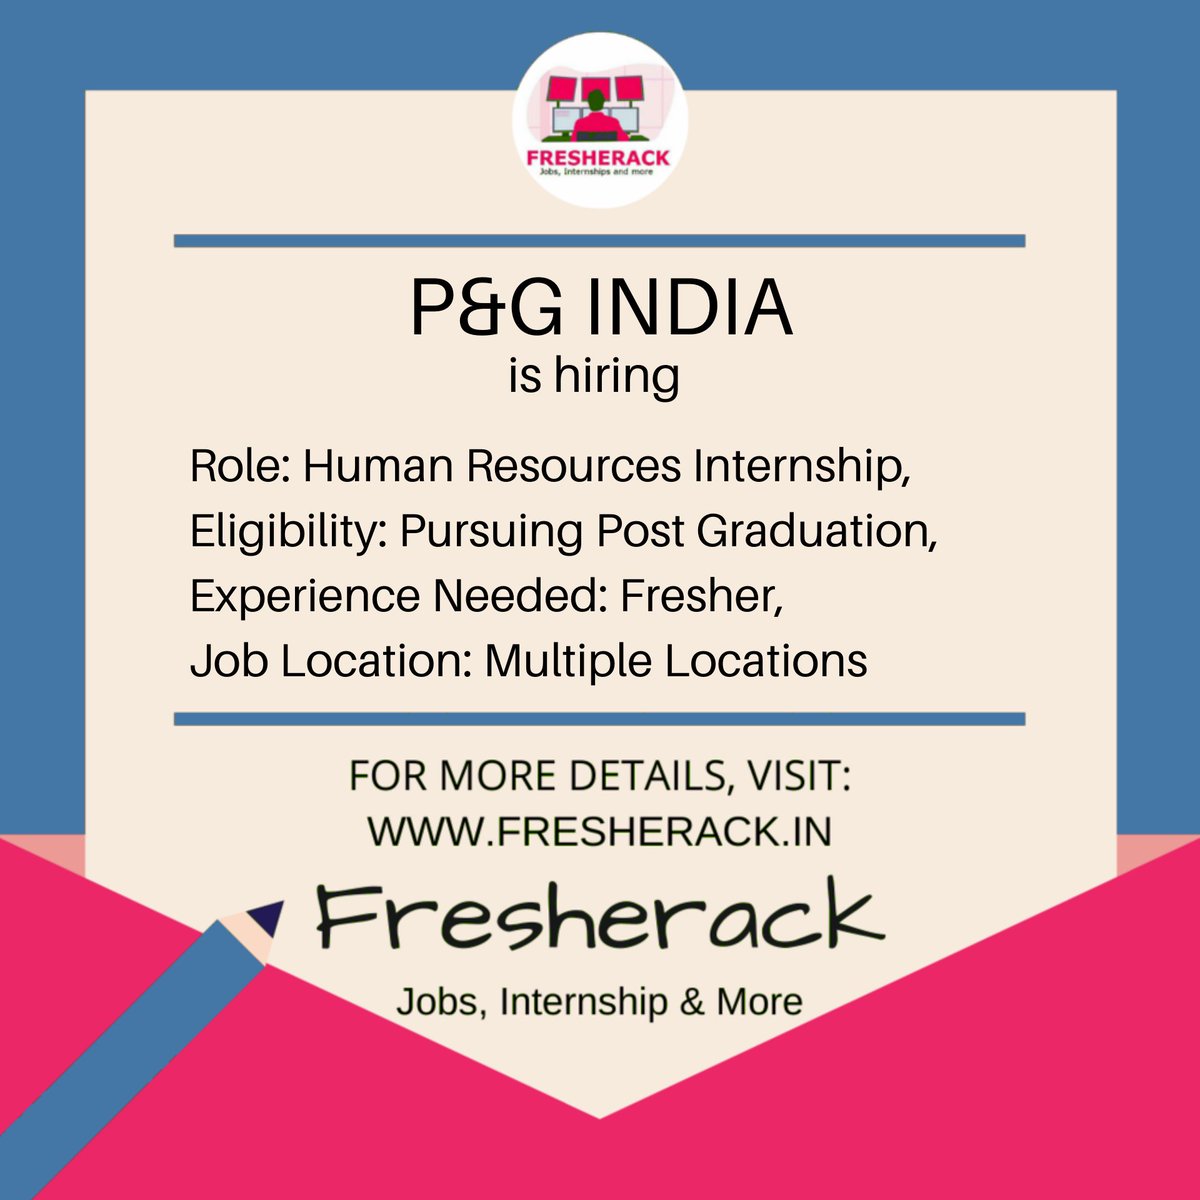 Human Resources Internship | P&G INDIA | Multiple Locations

For More Details and Apply Link: bit.ly/35BYs7f

For More Jobs, Visit: fresherack.in 

#internship #internships #internshipopportunity #intern #intern2020 #hrinternship #hiring #careers #intern